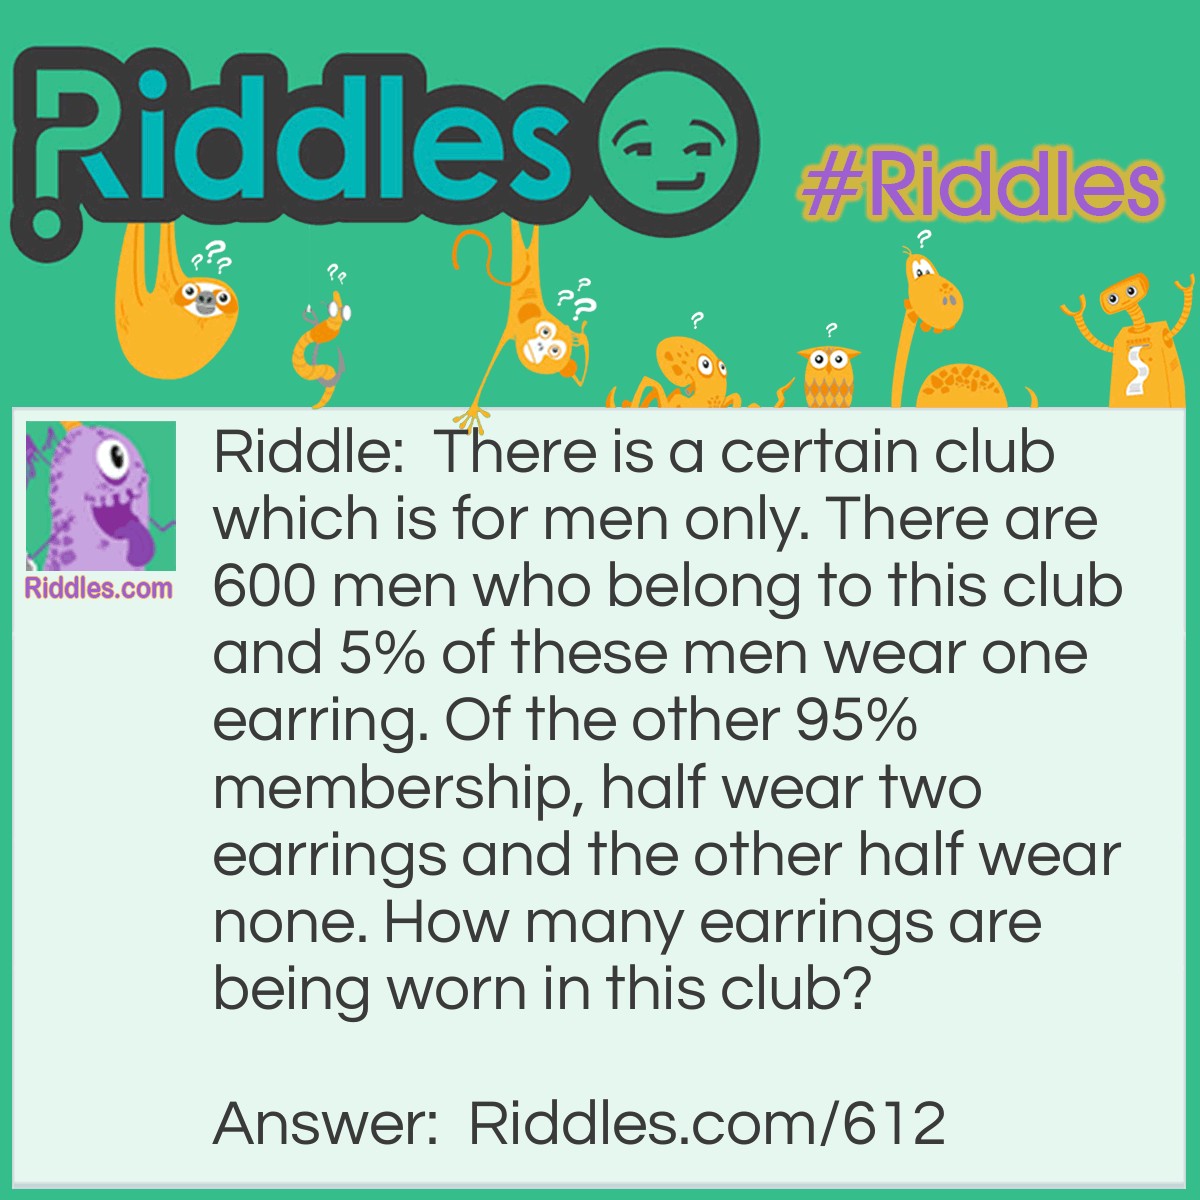 Riddle: There is a certain club which is for men only. There are 600 men who belong to this club and 5% of these men wear one earring. Of the other 95% membership, half wear two earrings and the other half wear none. How many earrings are being worn in this club? Answer: Six hundred. We know that 5%, or 30 of the men are wearing one earring. Of the other 95%, or 570, we know that half are wearing two earrings and the other half none. This is the same as if they all wore one.